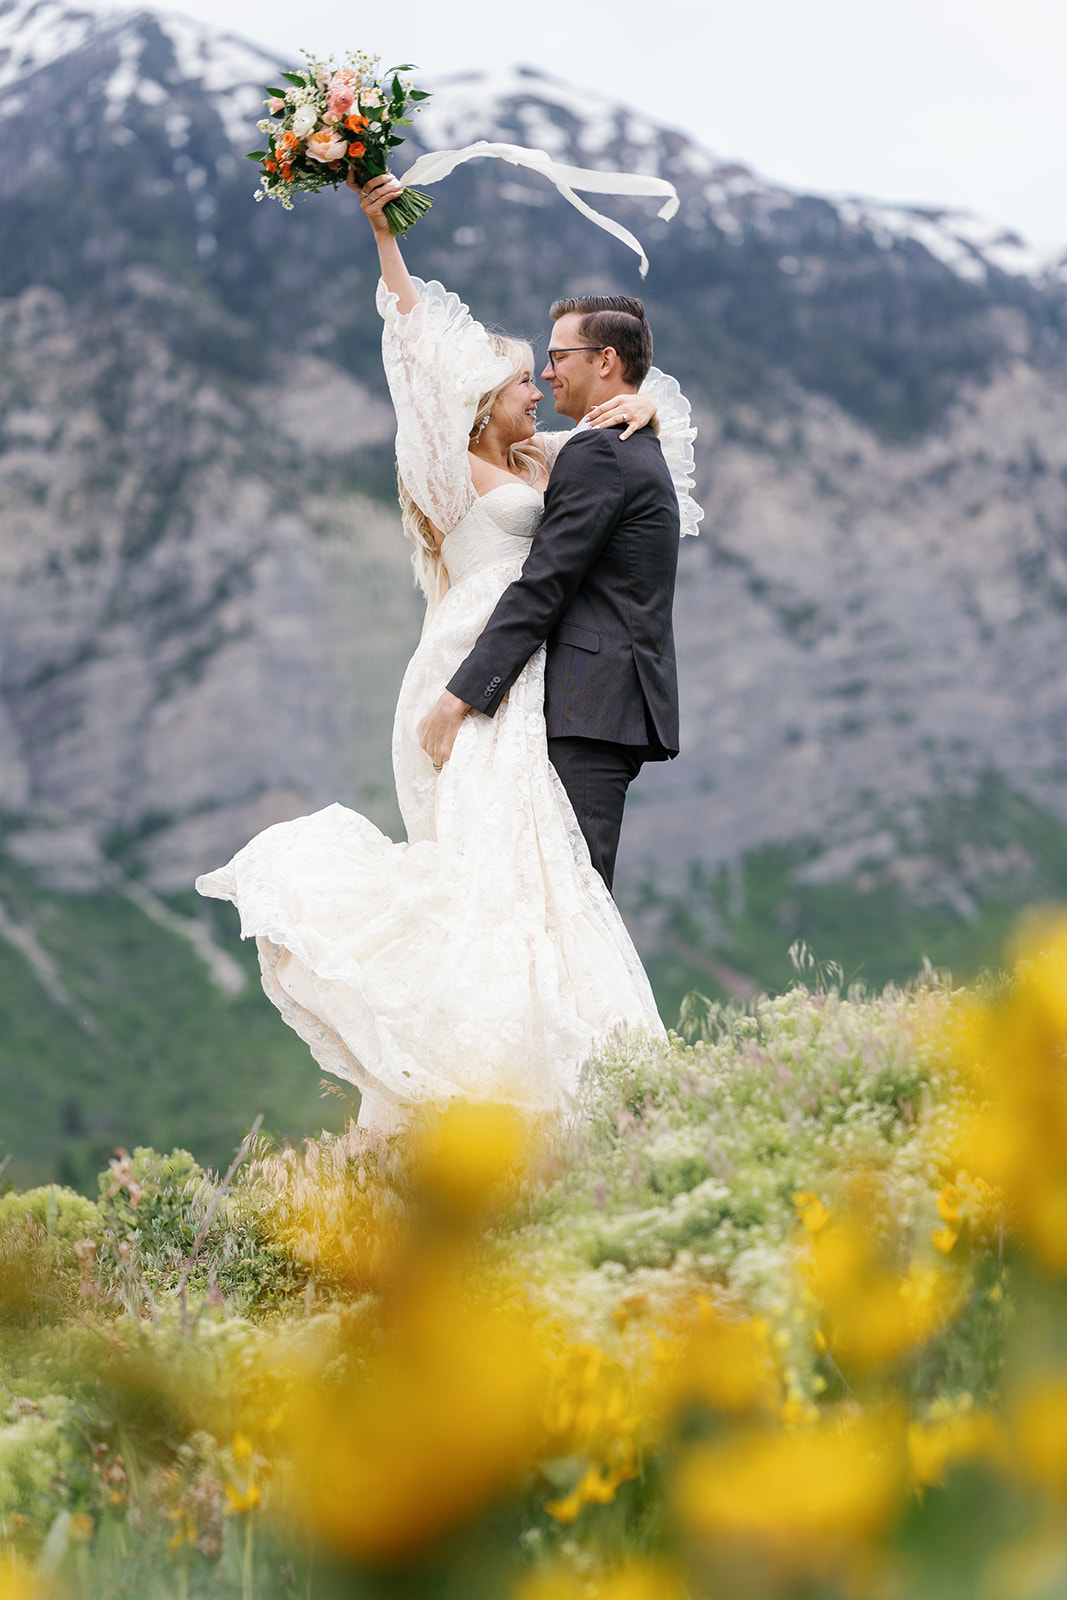 Newlyweds celebrate while standing in a field of wildflowers in the mountains